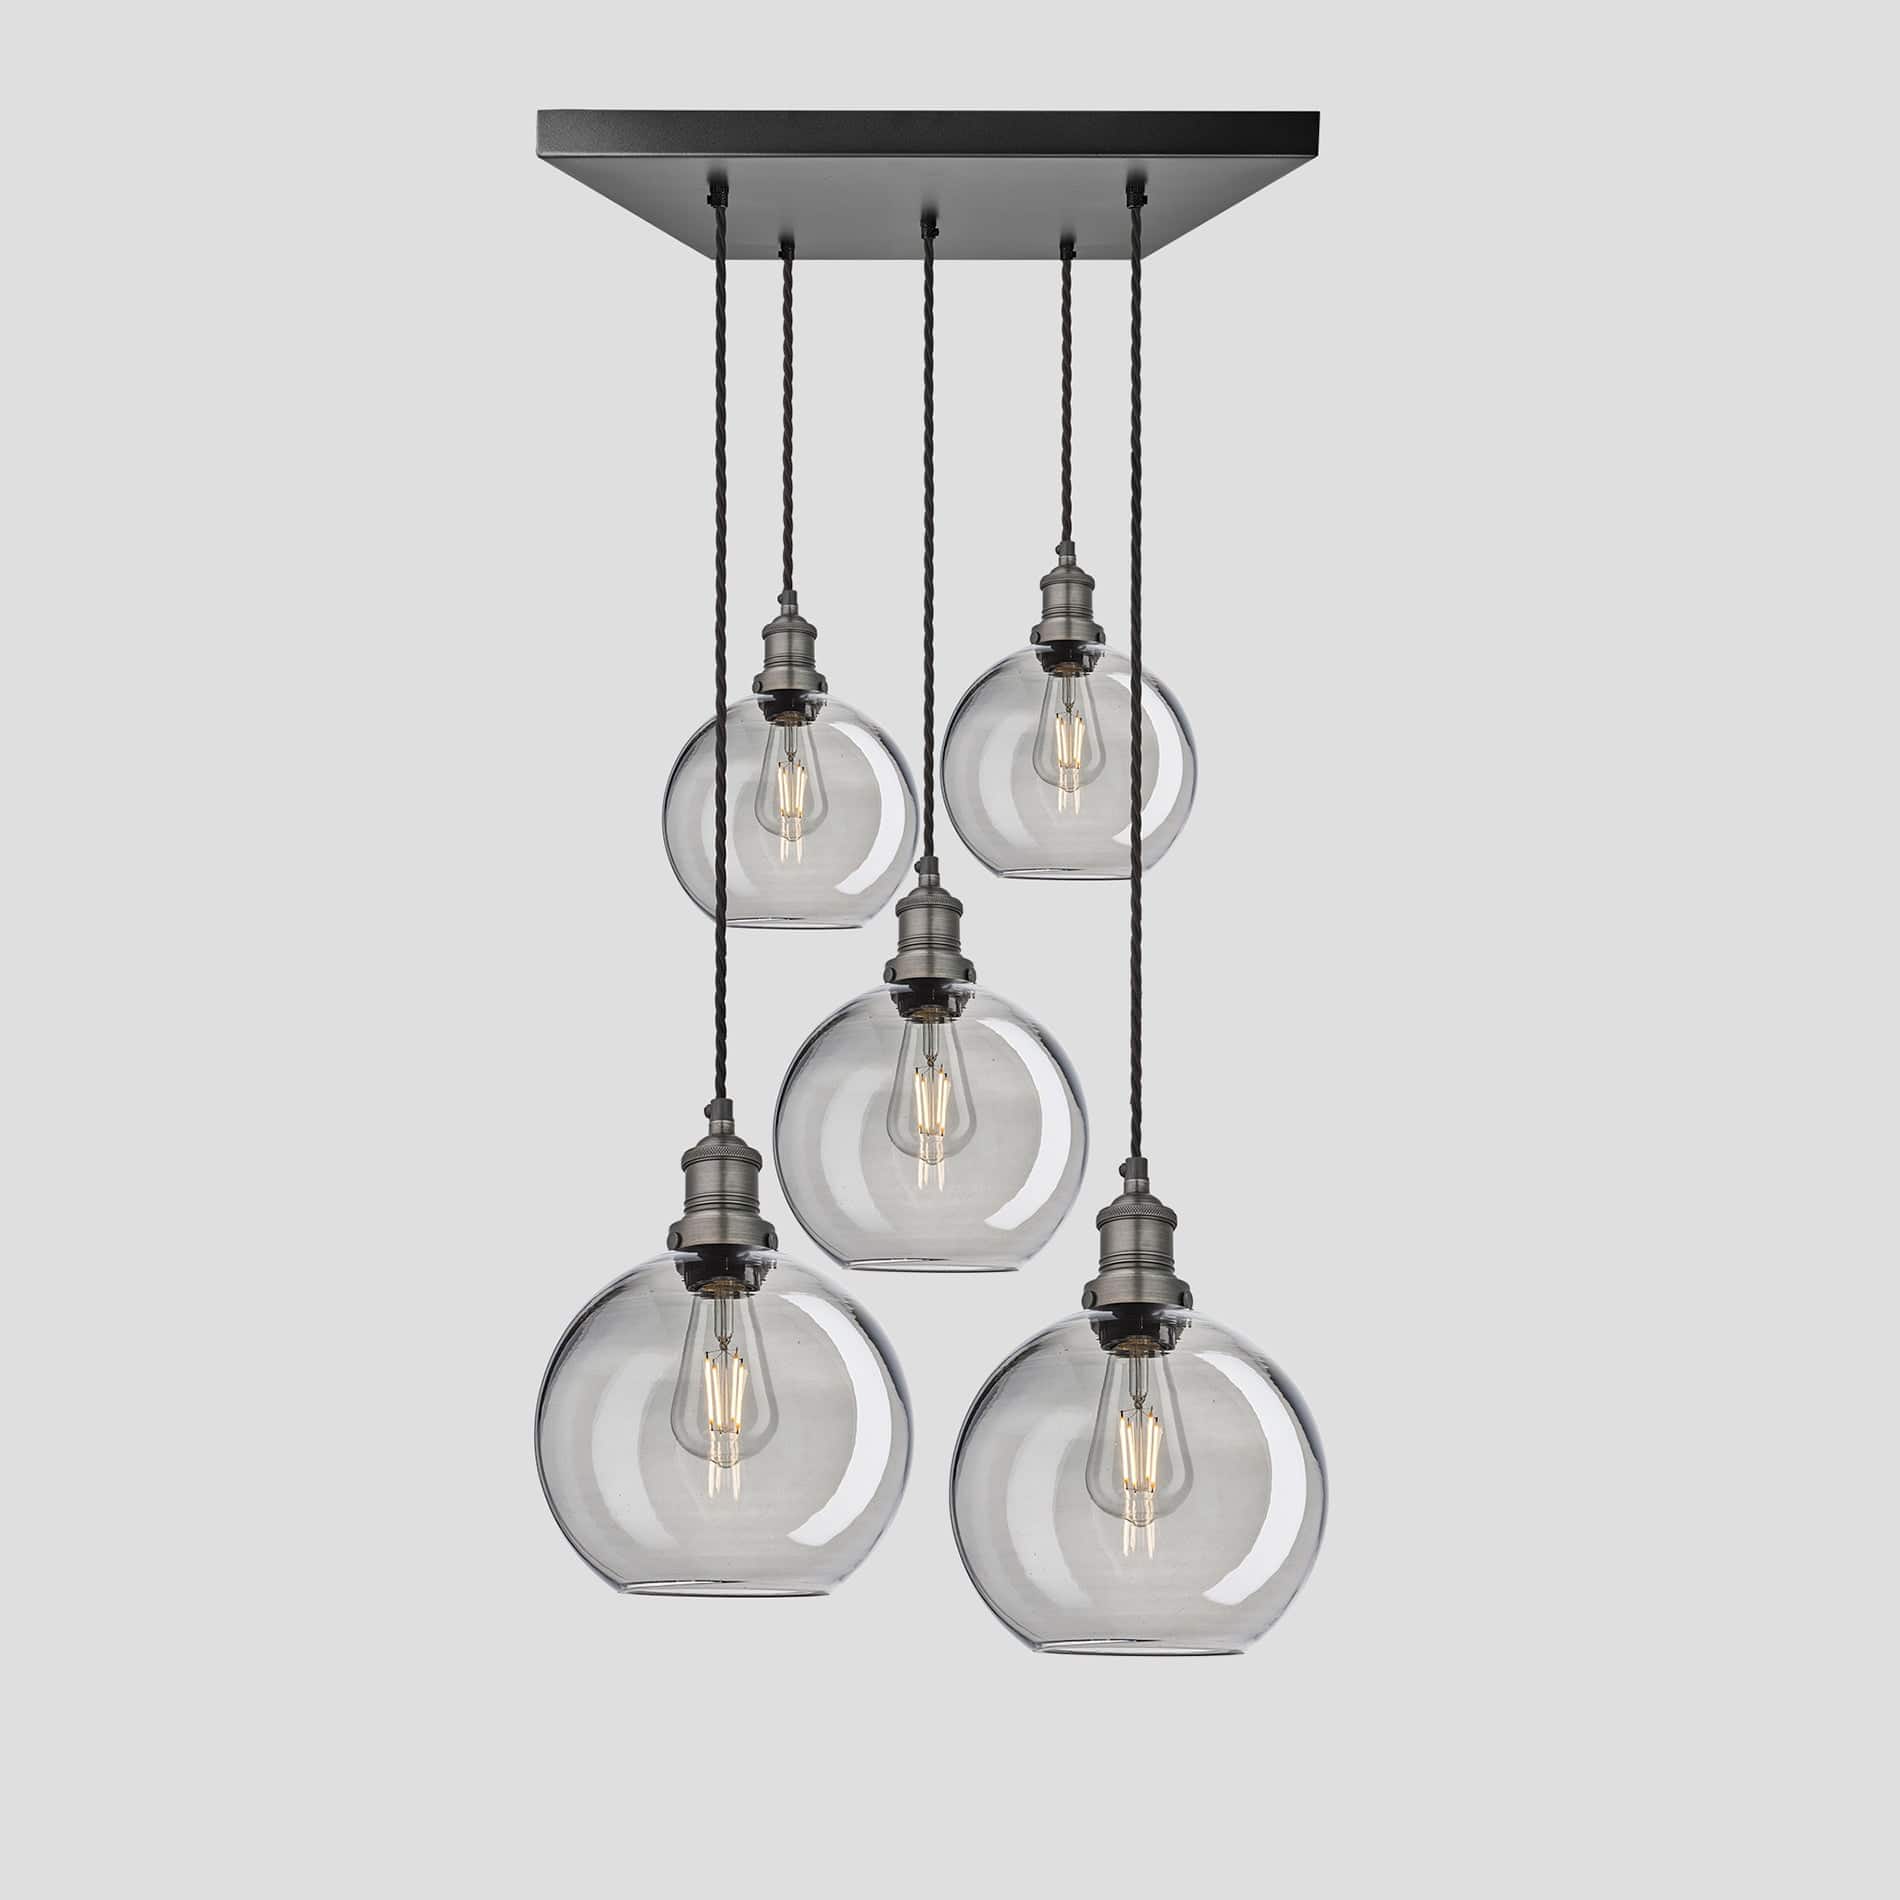 Brooklyn Tinted Glass Globe 5 Wire Square Cluster Lights - 9 inch - Smoke Grey Industville BR-TGL-GL9-5WSQCL-SG-PH